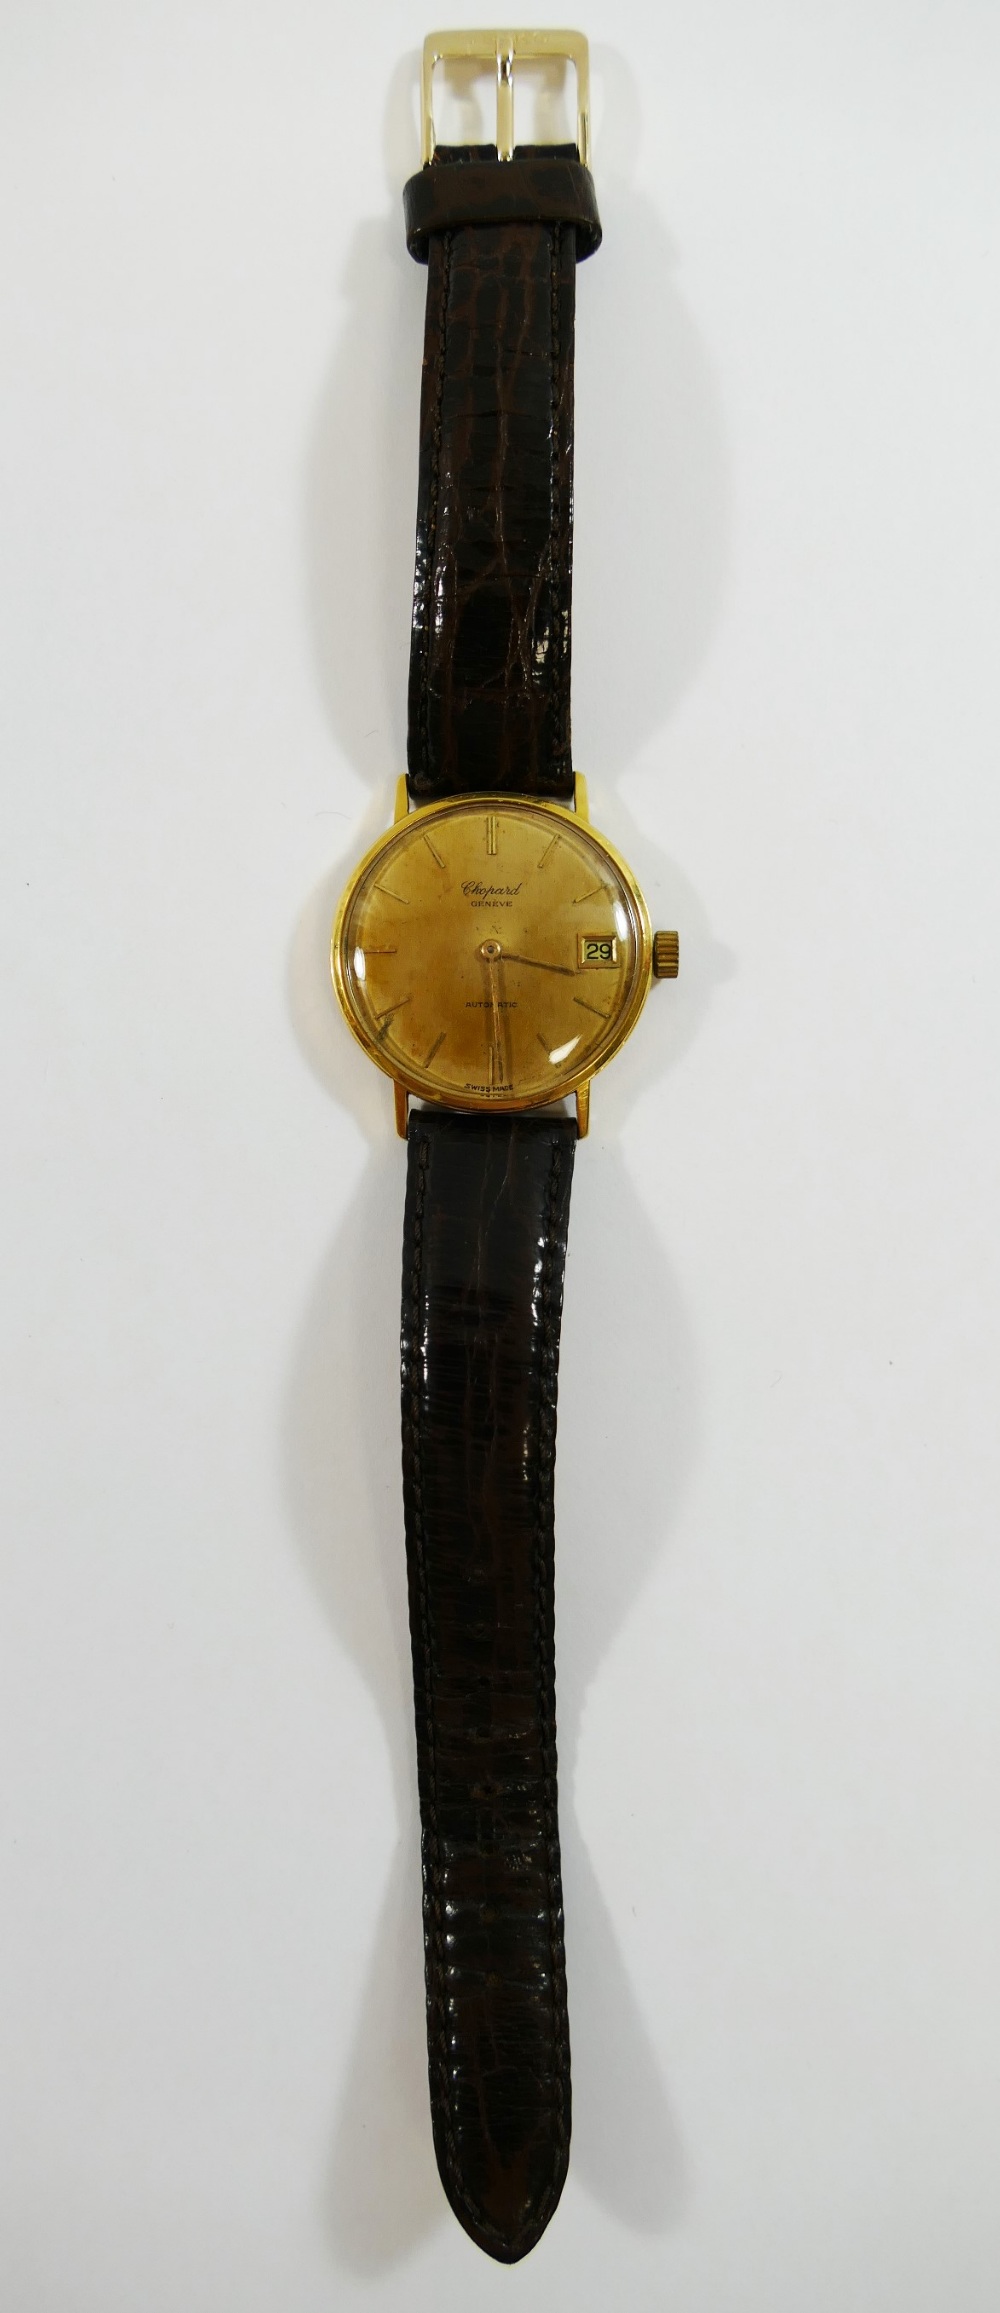 A gentleman's Chopard 18 carat gold cased automatic wrist watch, with 30 jewel movement, - Image 2 of 2